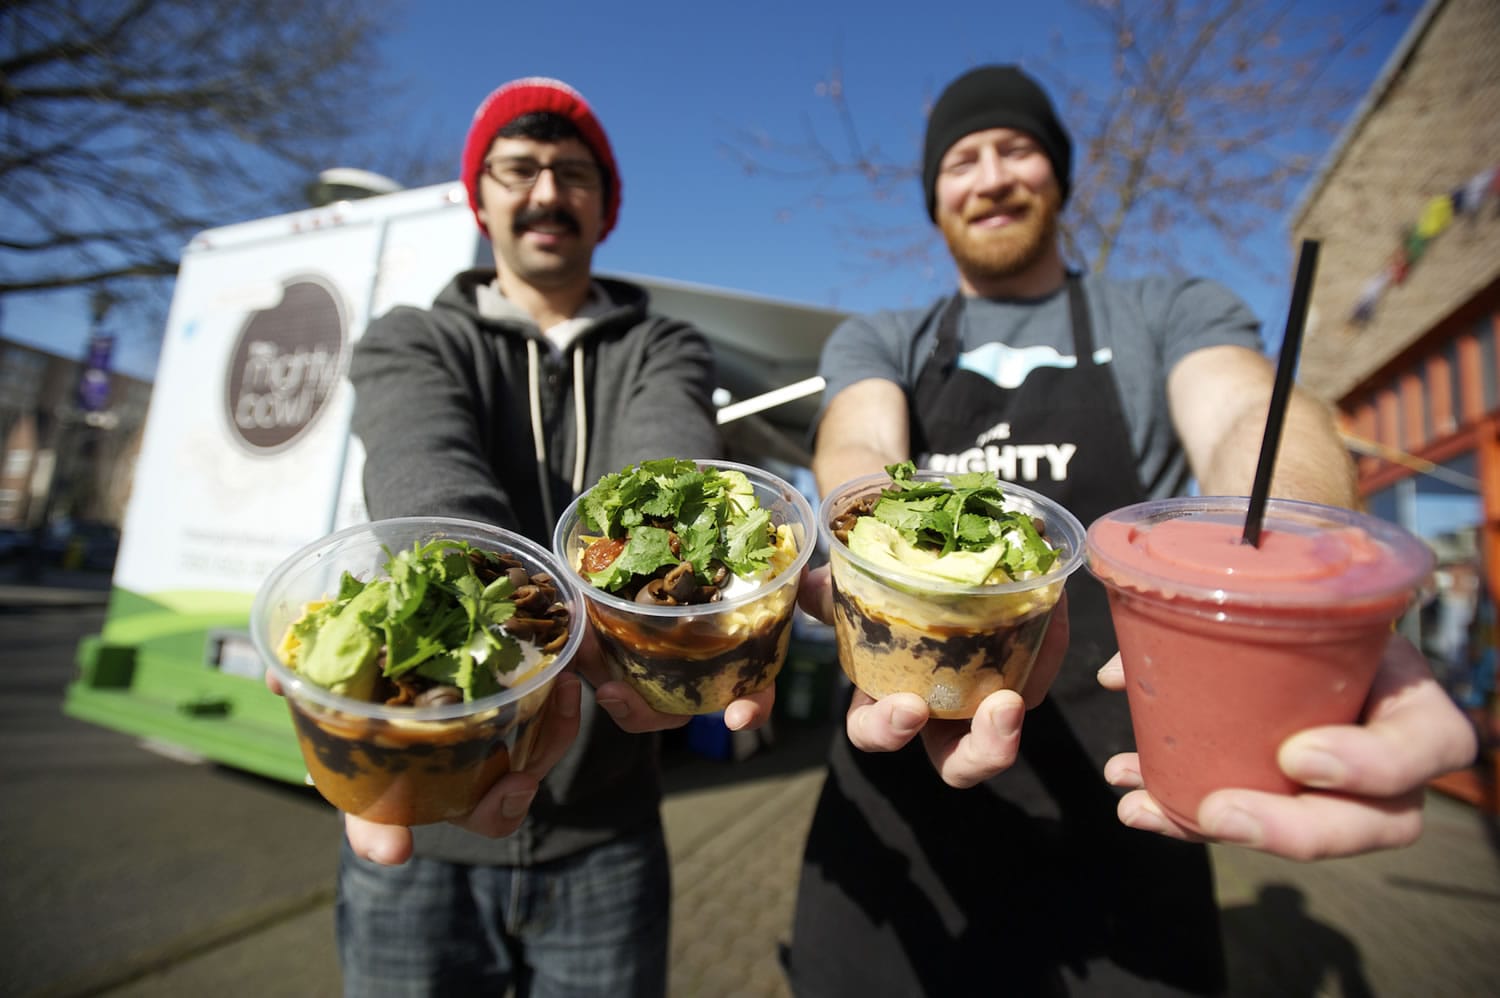 Steve Valenta, left, and Kevin DeGraw show off the Kiggins Bowl, from left, the Mighty Bowl, the Peanut Bowl and the Carter Park smoothie at Mighty Bowl.